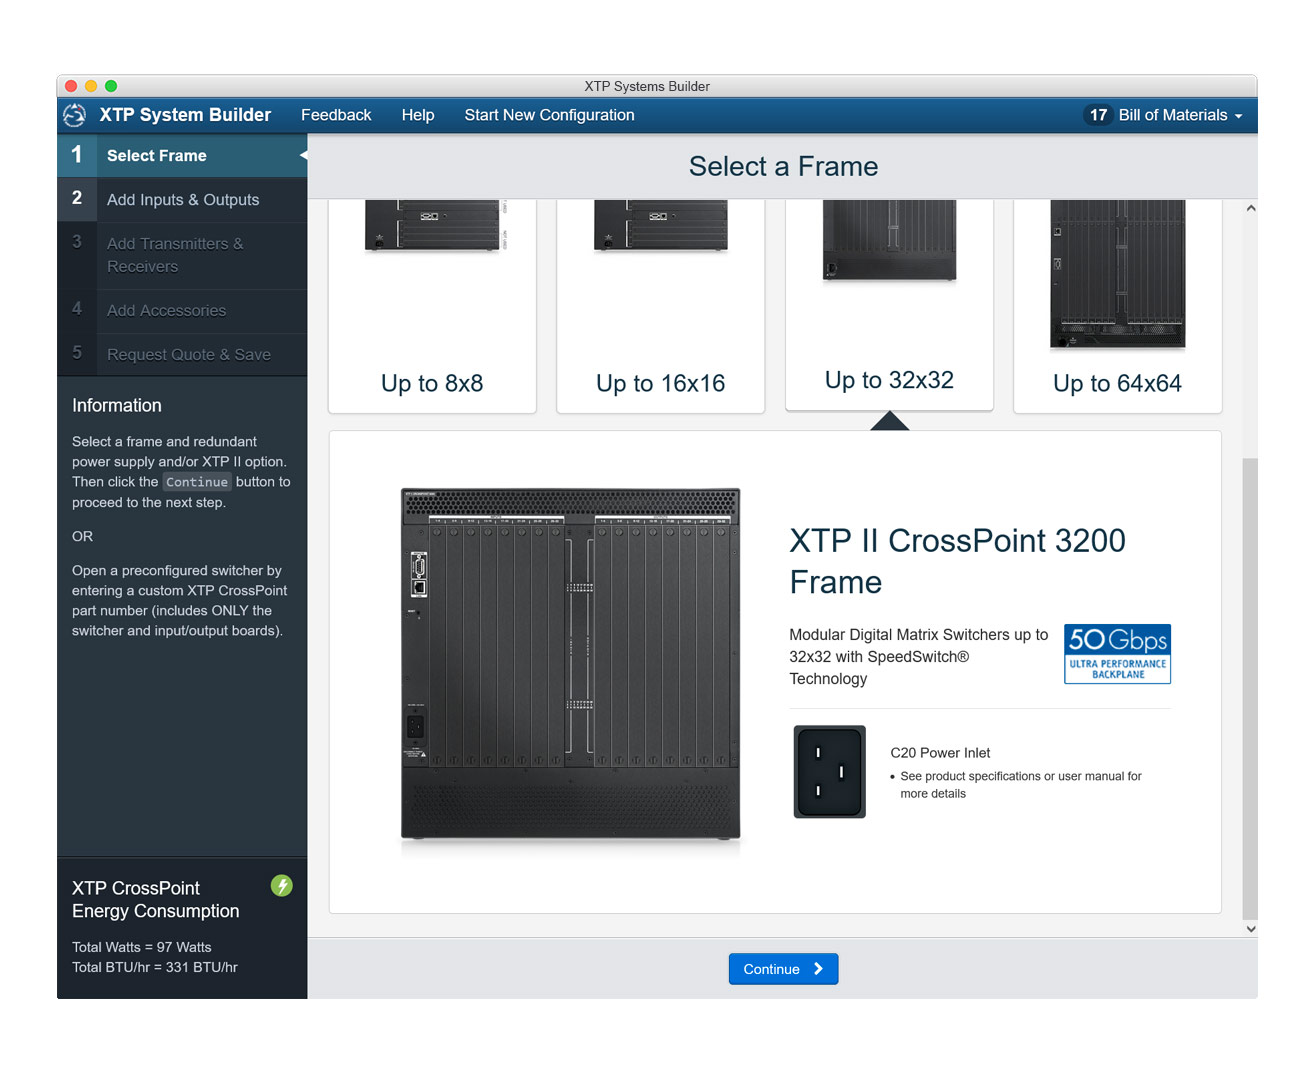 Select a frame to build your custom XTP CrossPoint Switcher